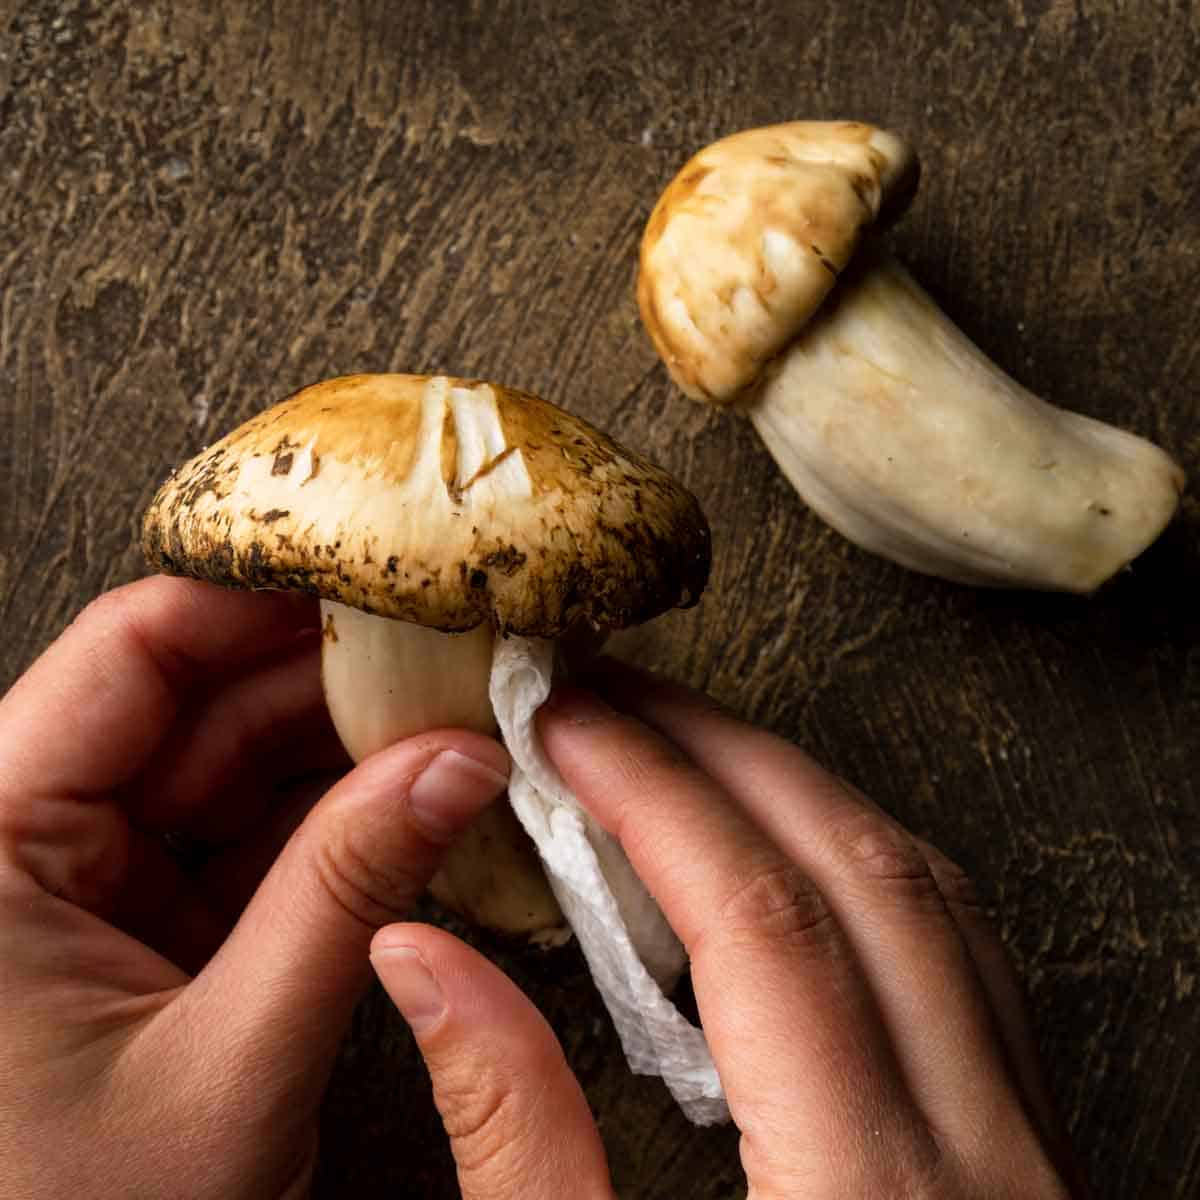 Cleaning a large matsutake mushroom with a damp paper towel